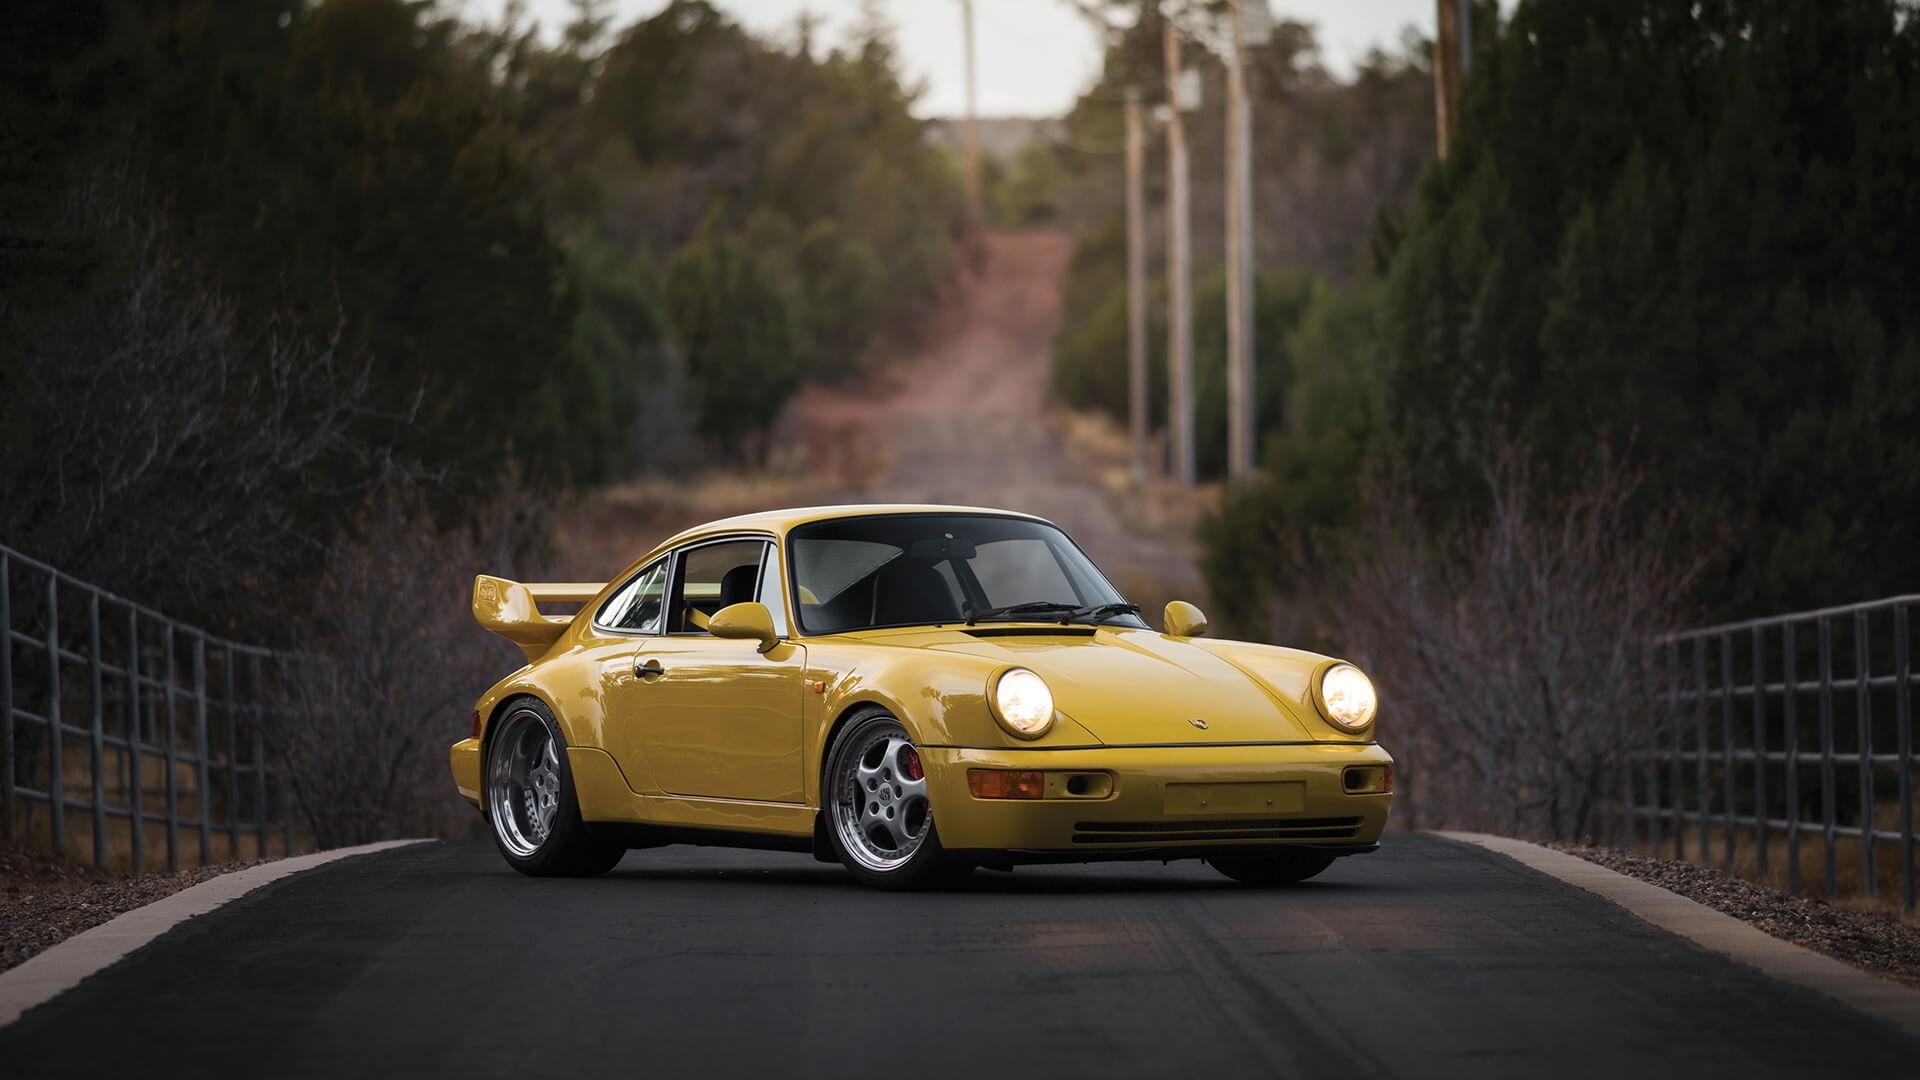 Porsches at the 2018 Amelia Island auctions – an expert’s view